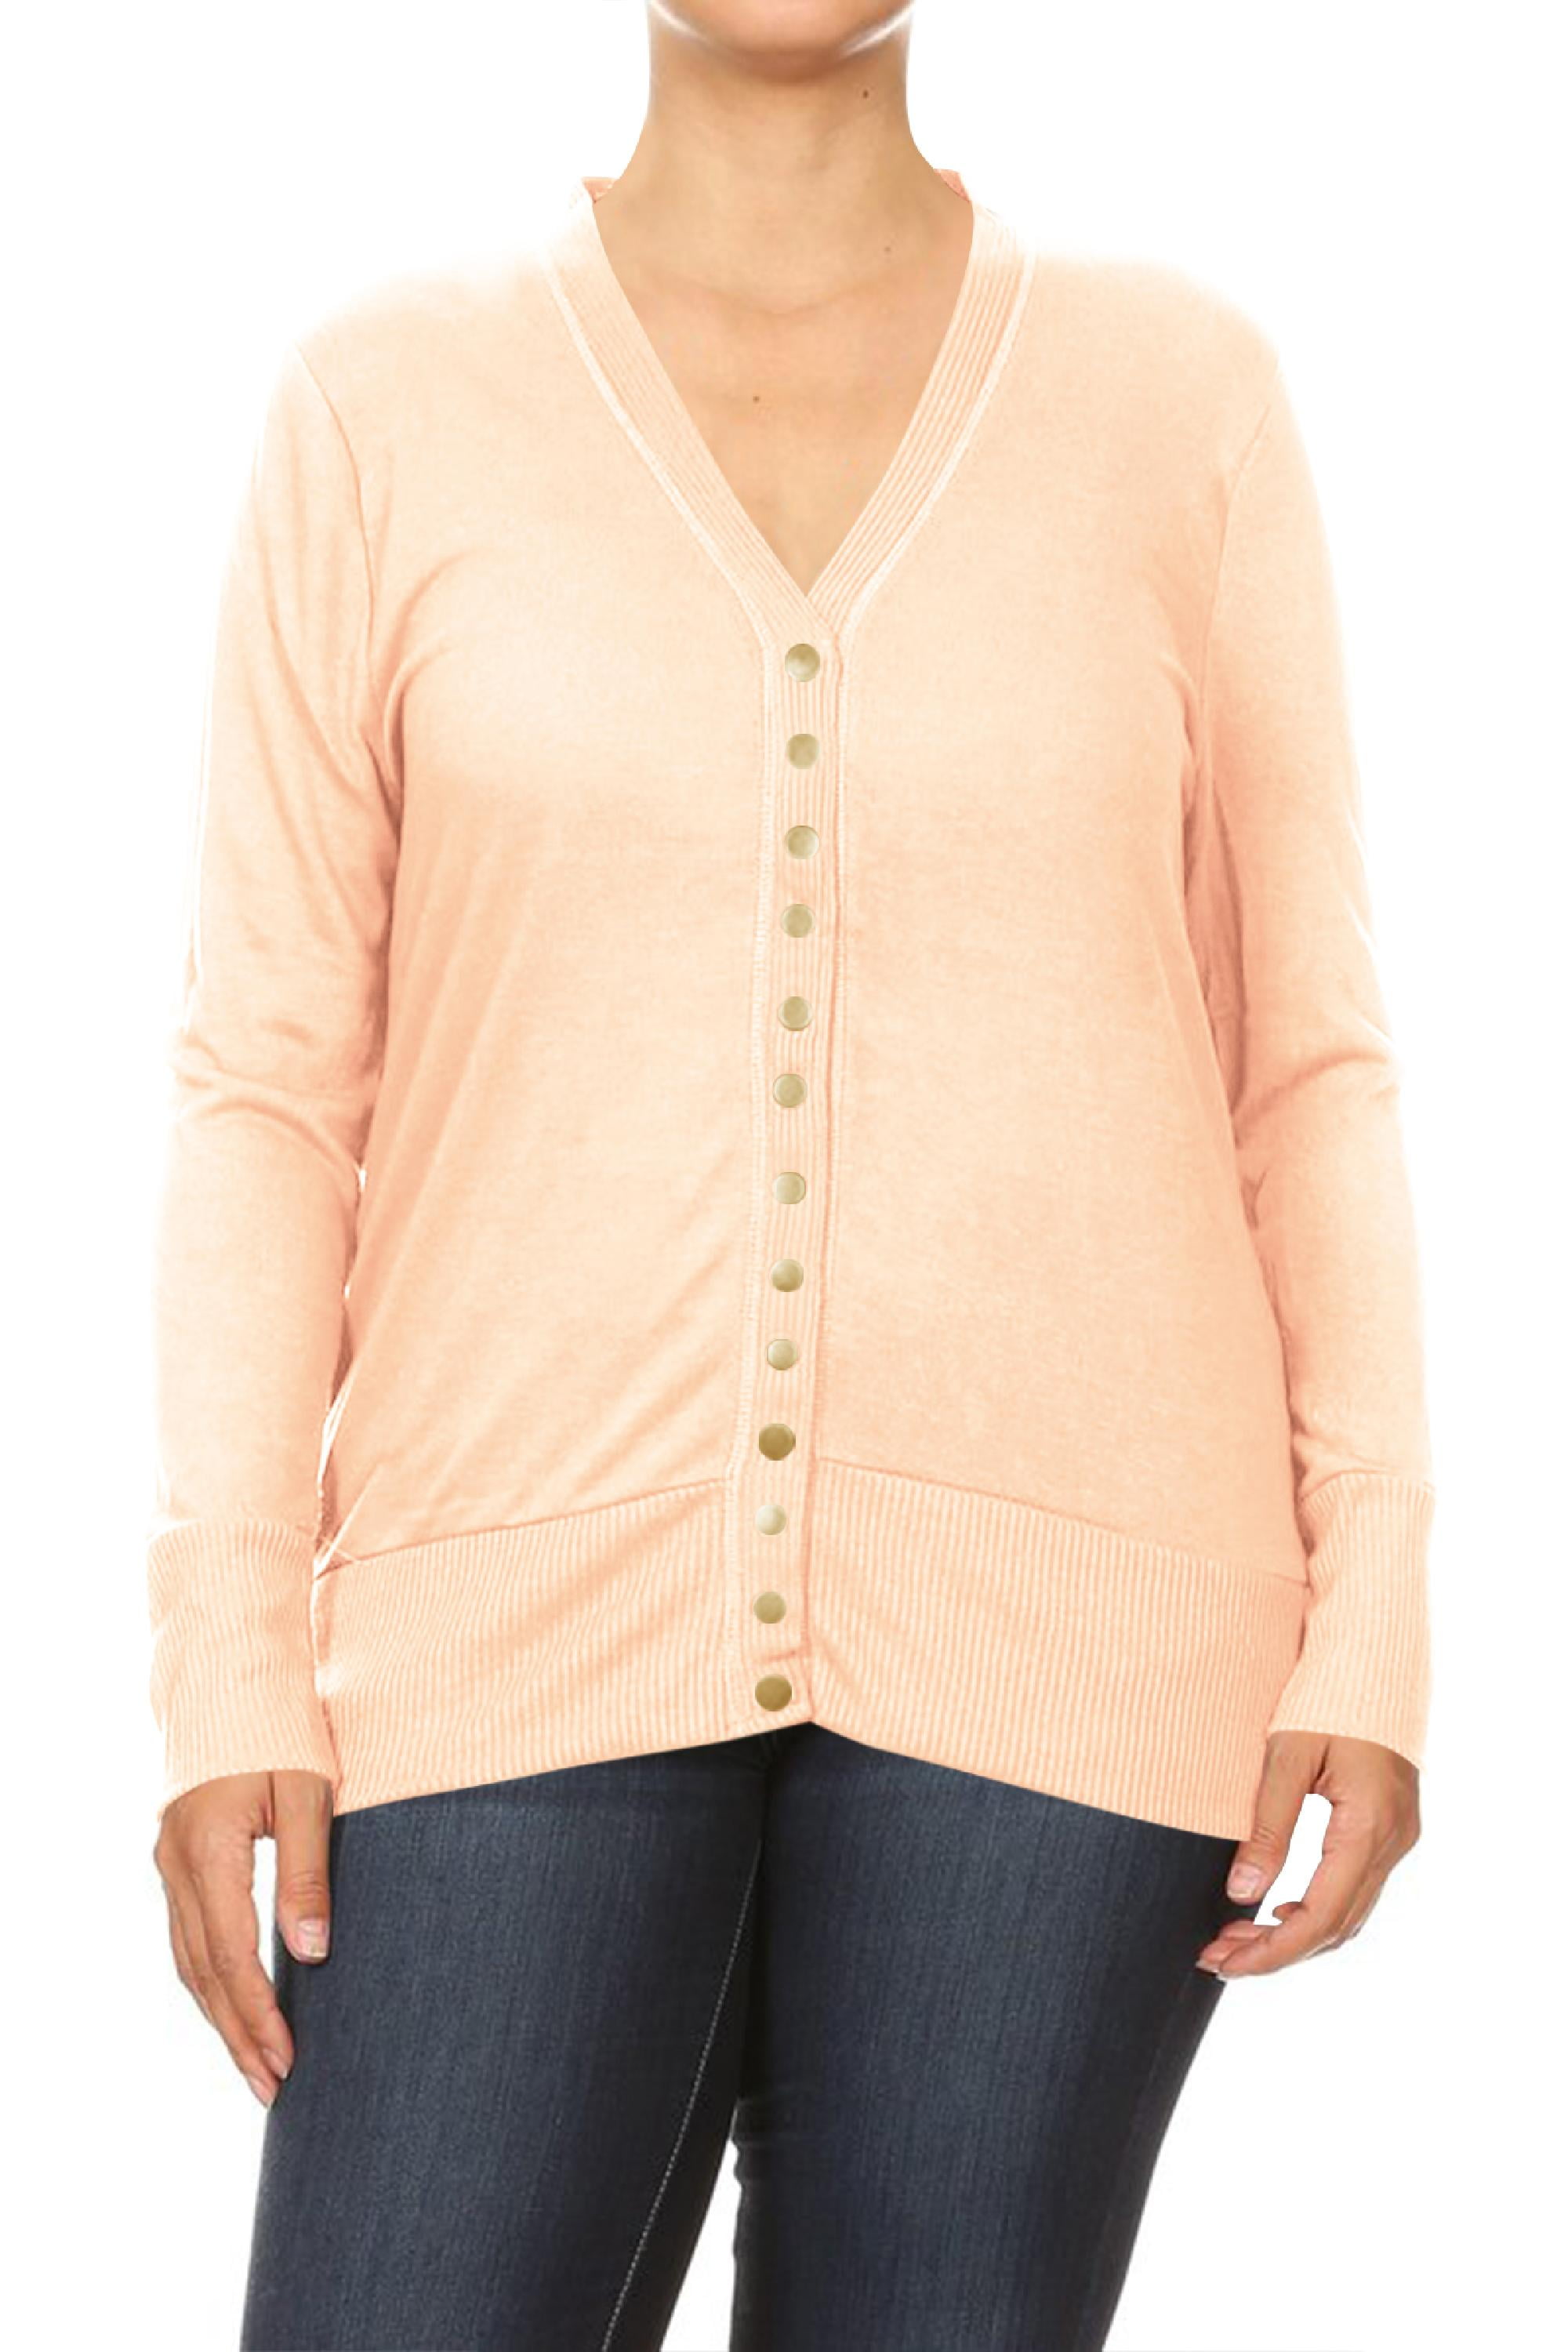 Women's Plus Size V-Neck Button Up Front Lightweight Fitted Long Sleeve Solid  Cardigan - Walmart.com